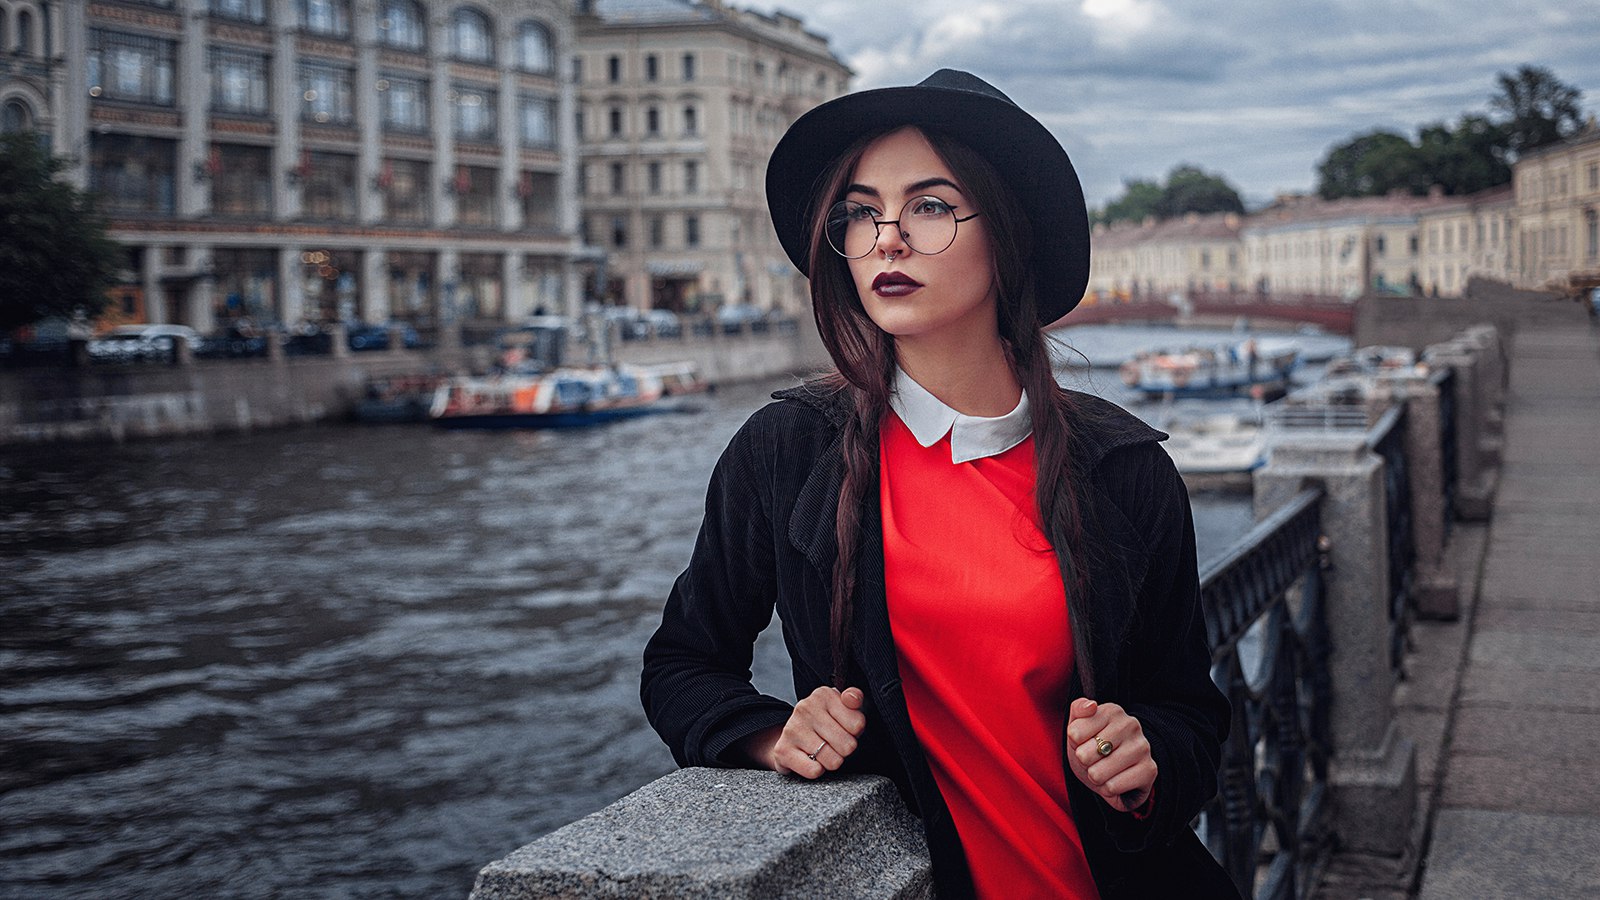 People 1600x900 women model brunette women outdoors water pierced septum black hat rings black jackets glasses pierced nose makeup red dress collar blurred blurry background looking into the distance St. Petersburg Russia river women with glasses building waves women with hats hat coats portrait sky clouds